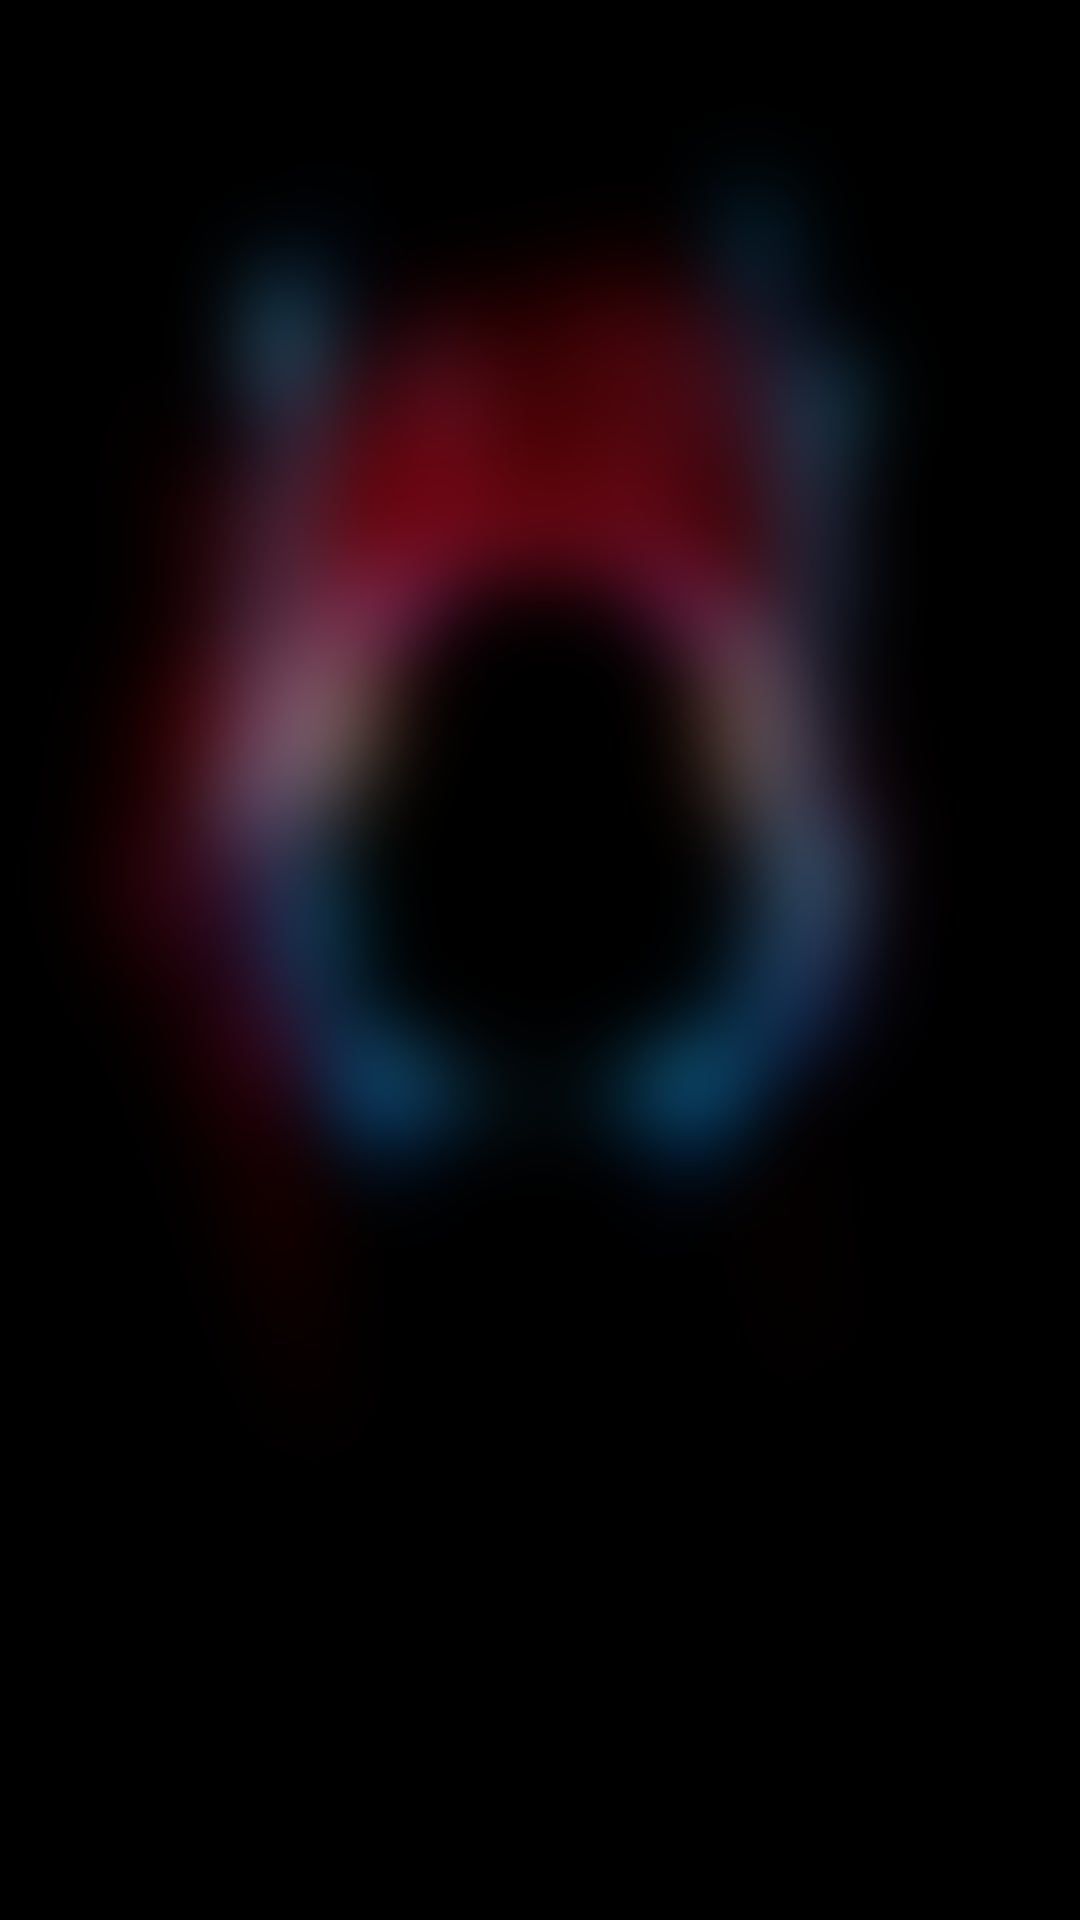 Took BossLogic's post and tried to turn it into an AMOLED